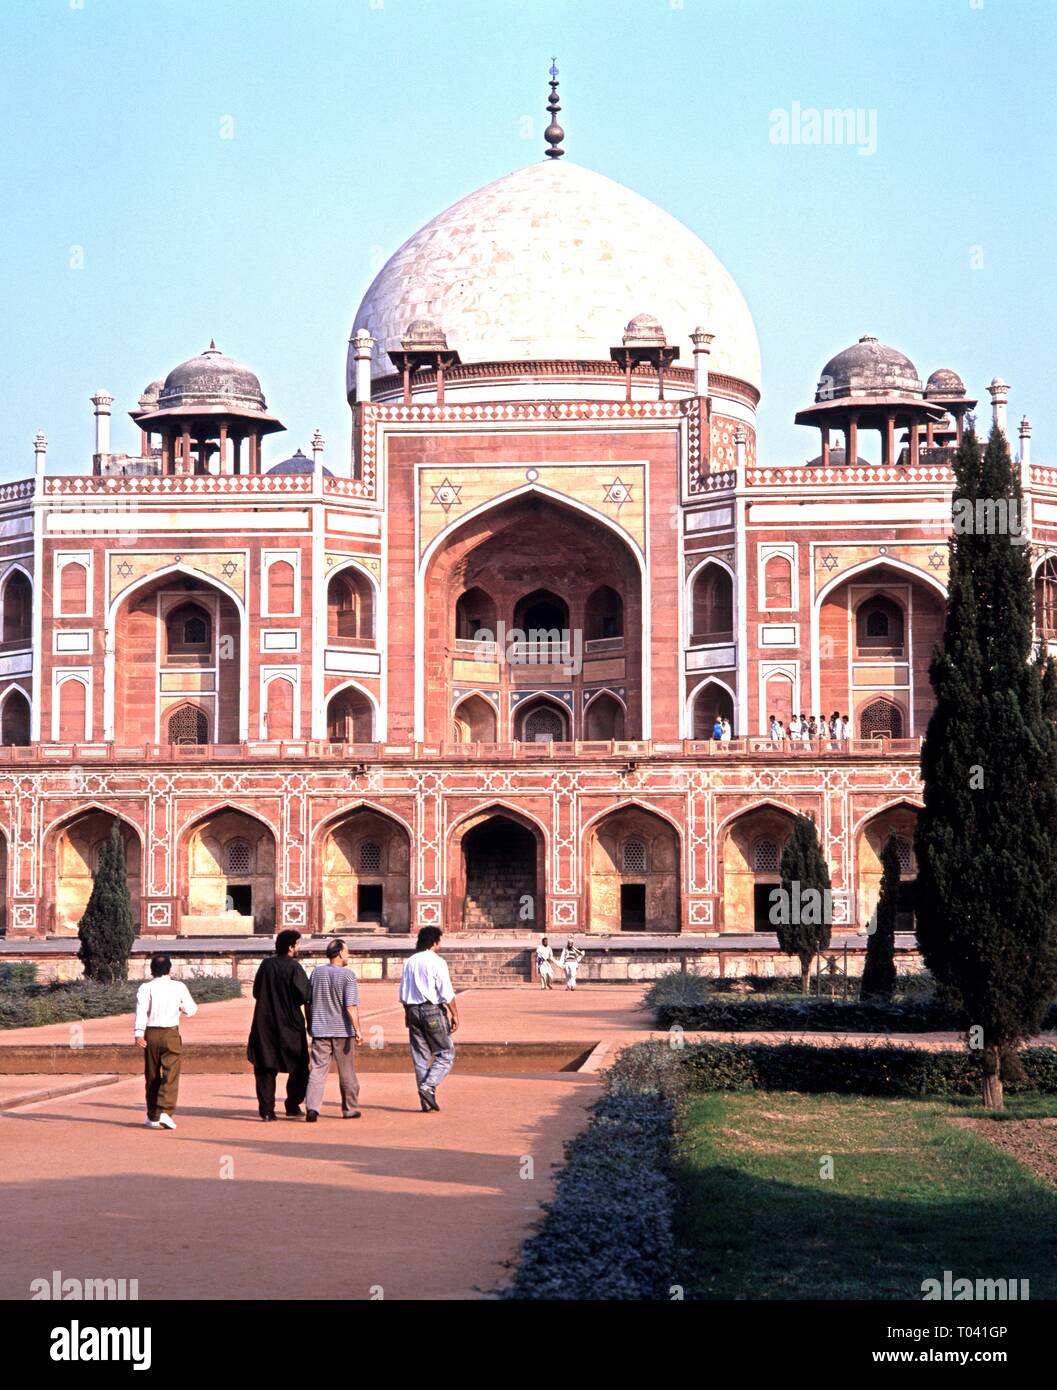 View of the Tomb of Humayun with local people in the foreground, Delhi, Delhi Union Territory, India. Stock Photo